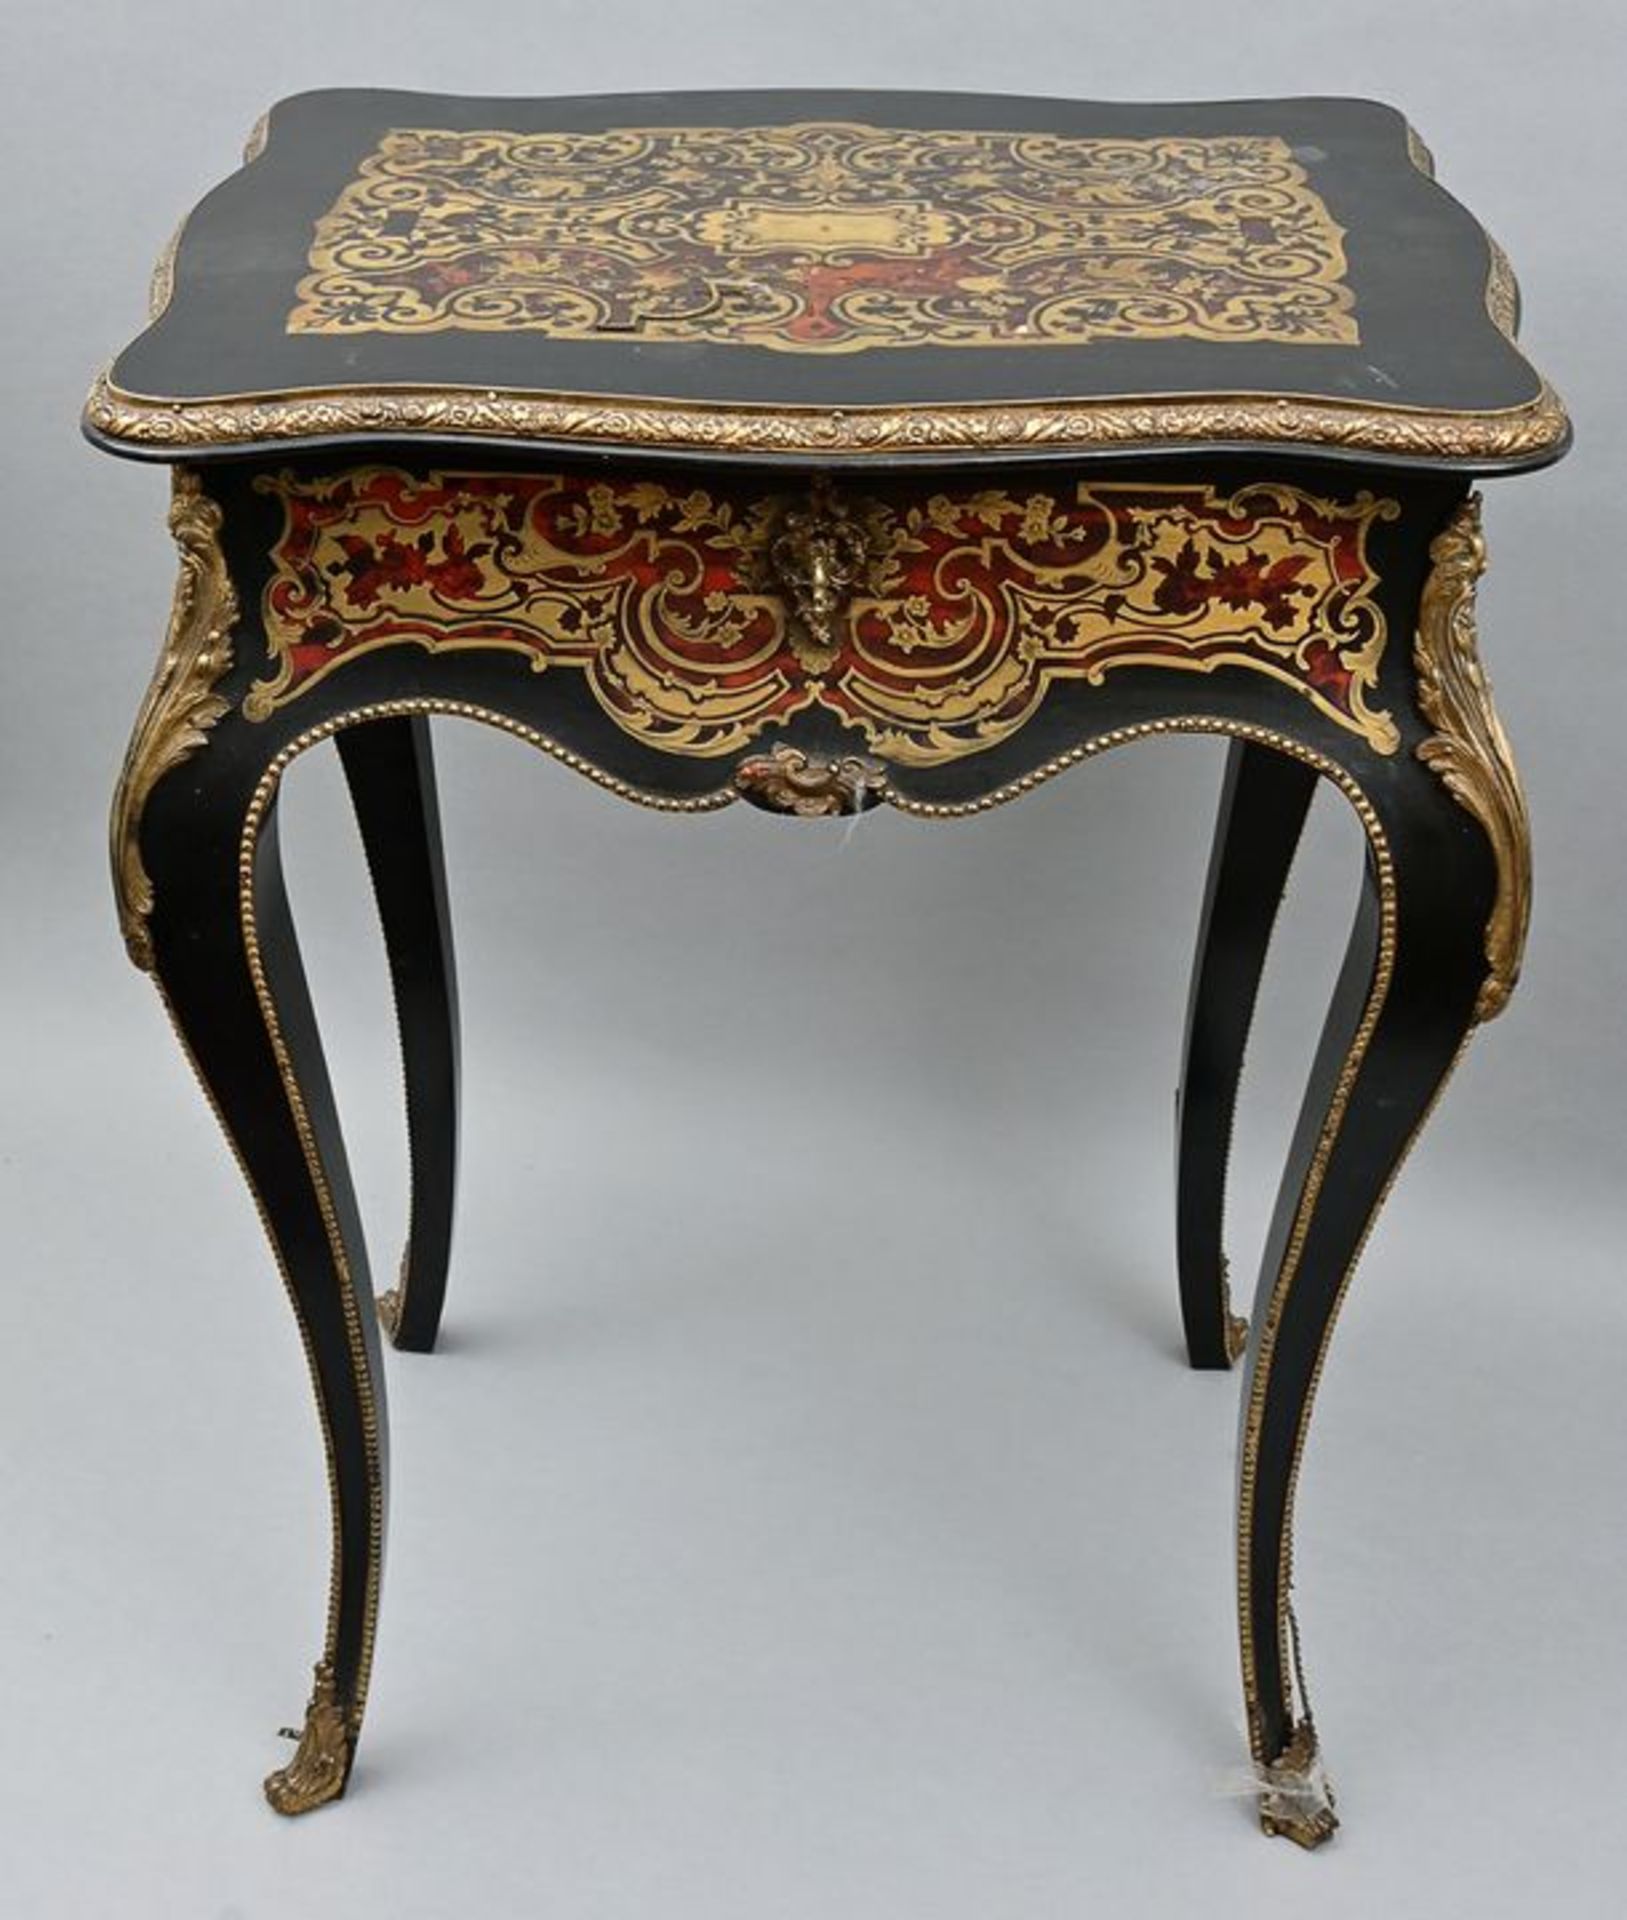 Boulle-Nähtisch / Sewing table